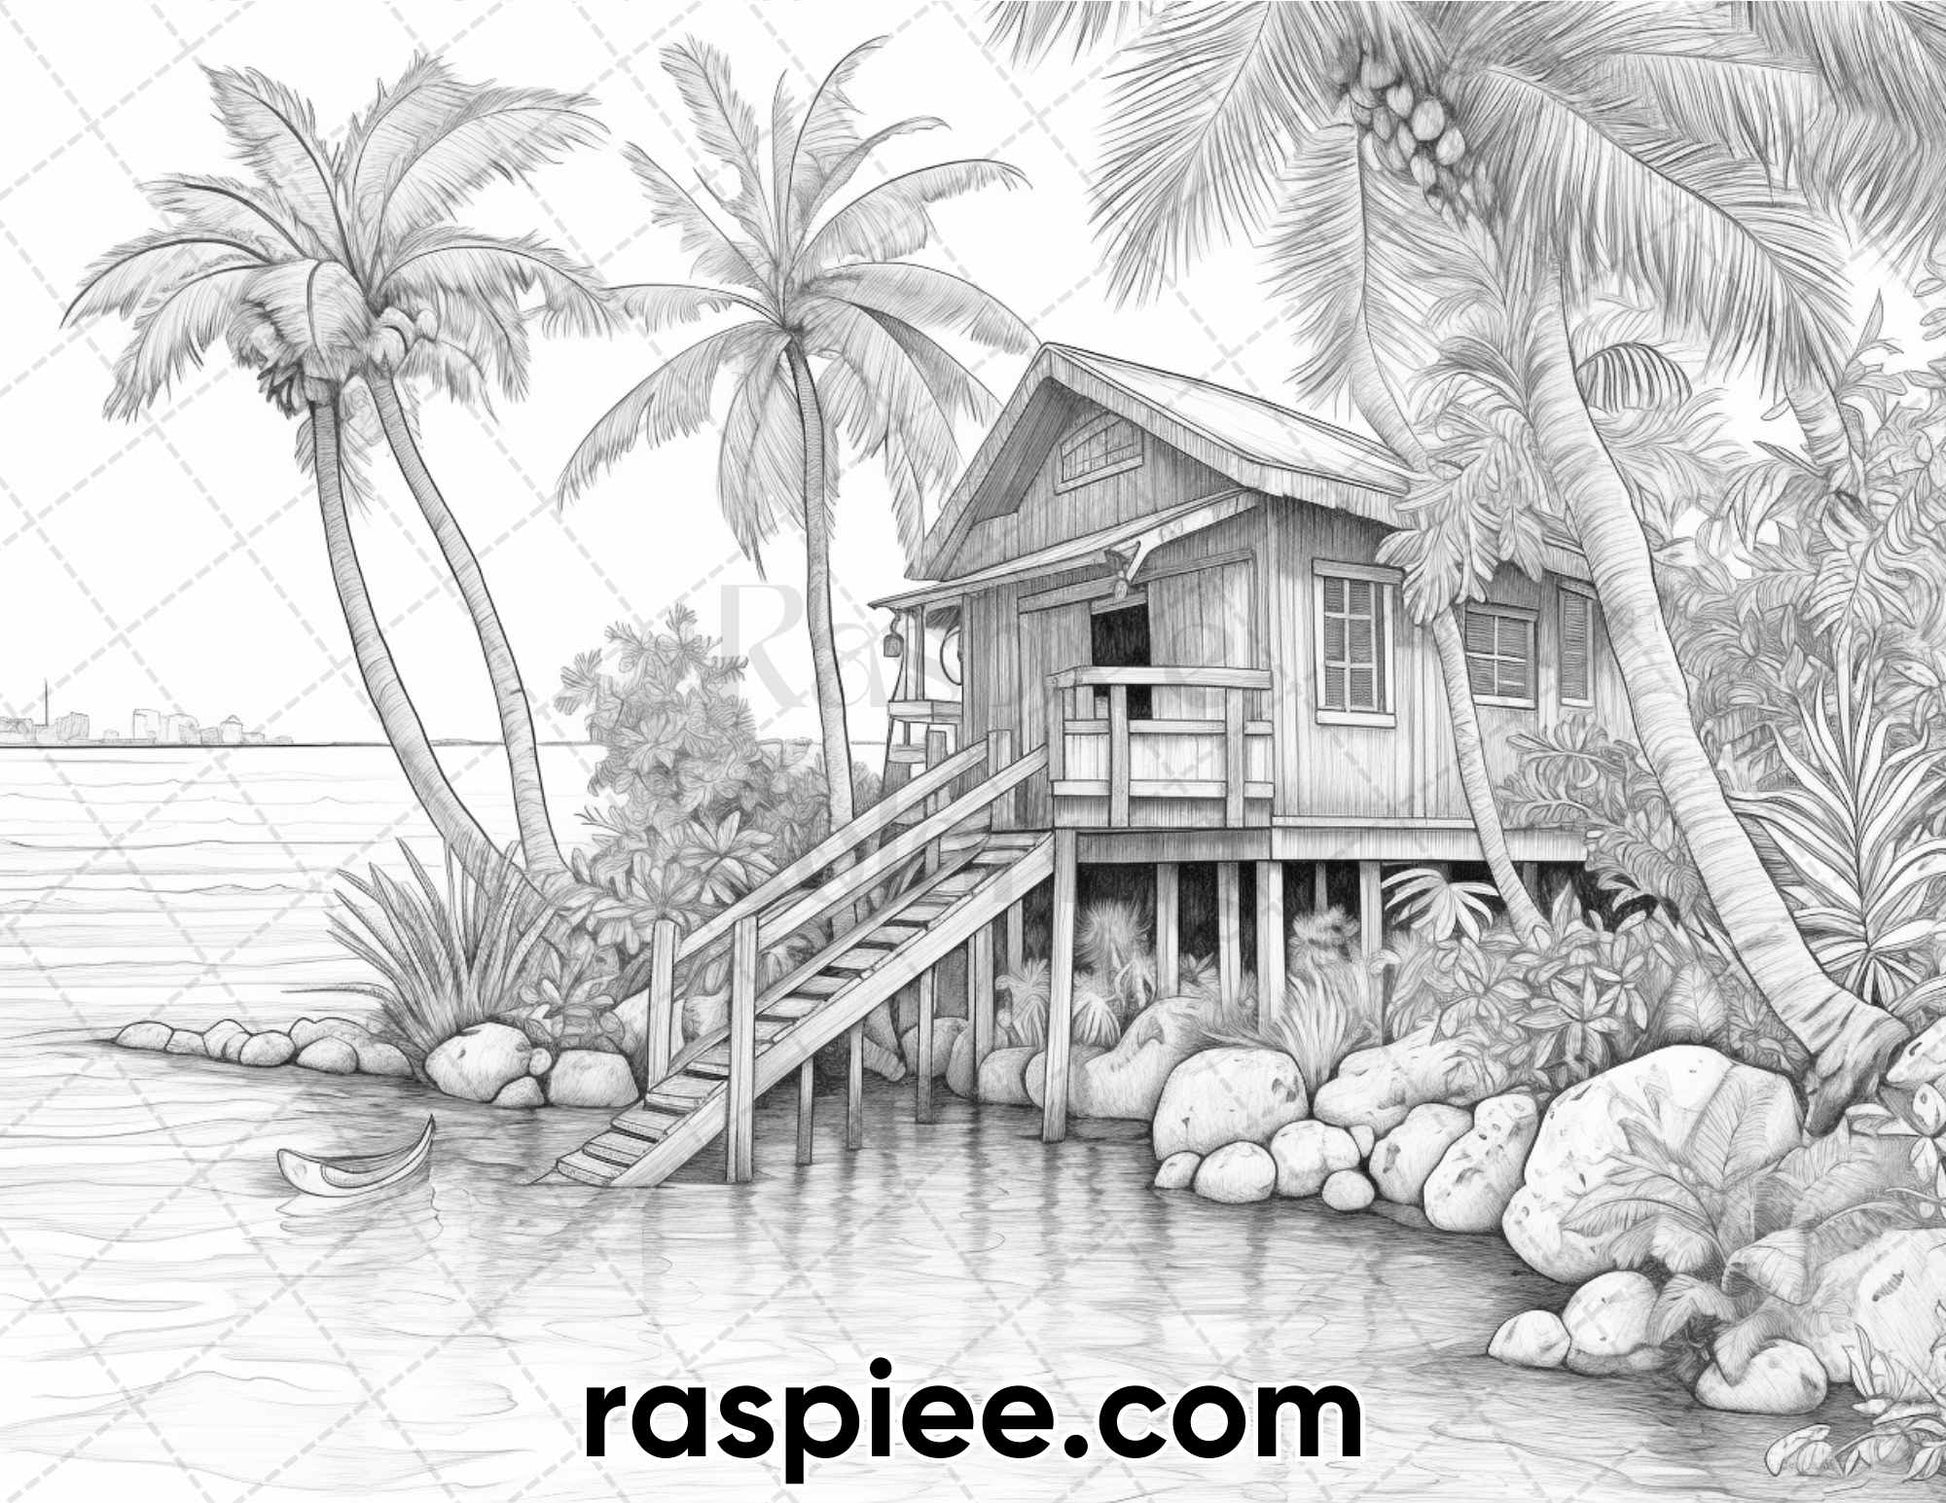 adult coloring pages, adult coloring sheets, adult coloring book pdf, adult coloring book printable, spring coloring pages for adults, spring coloring book pdf, animal coloring pages for adults, animal coloring book pdf, tropical coloring pages, summer coloring pages for adults, tropical coloring book pdf